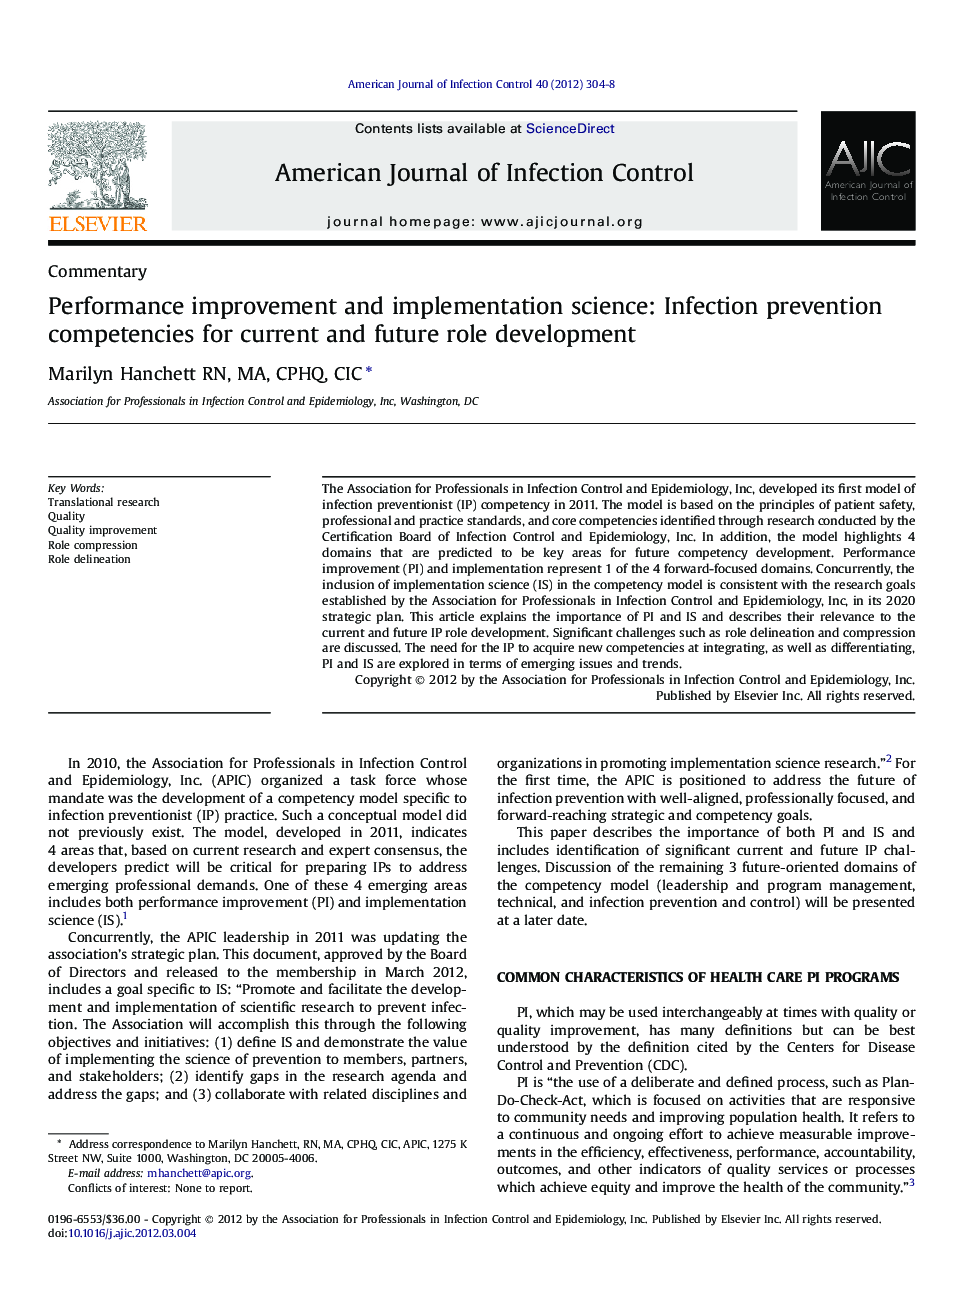 Performance improvement and implementation science: Infection prevention competencies for current and future role development 